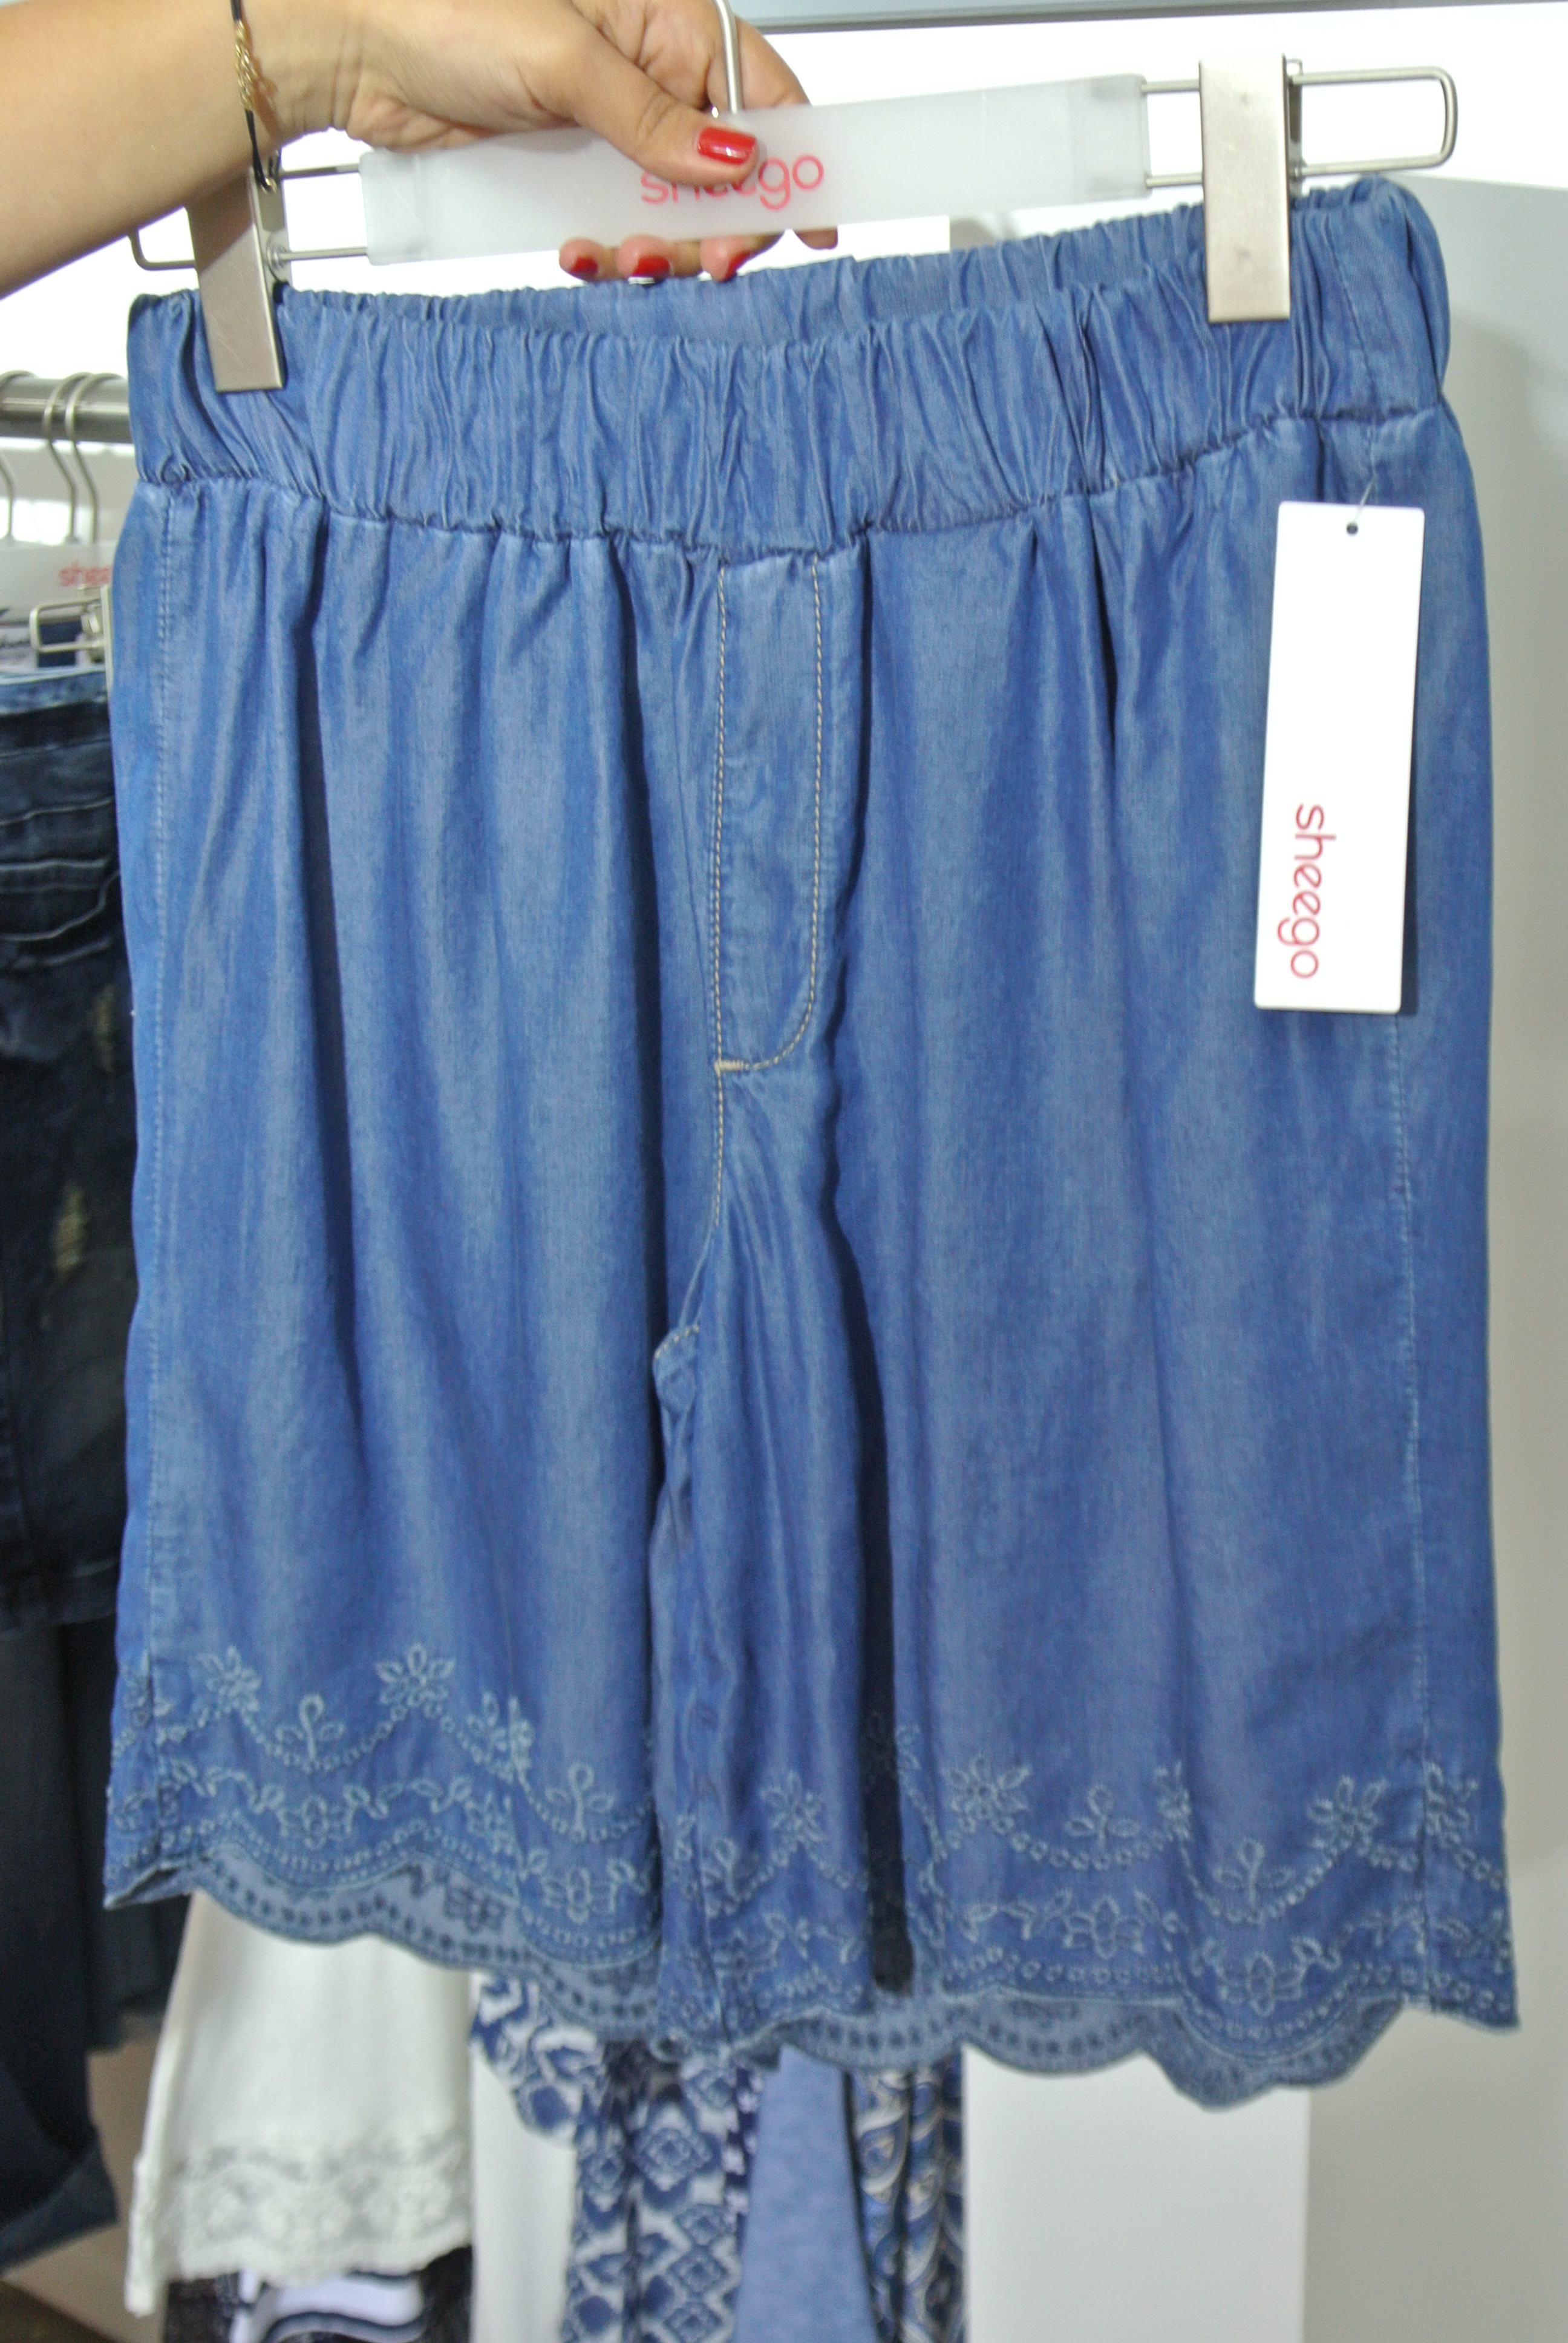 Sheego Jeans-Shorts